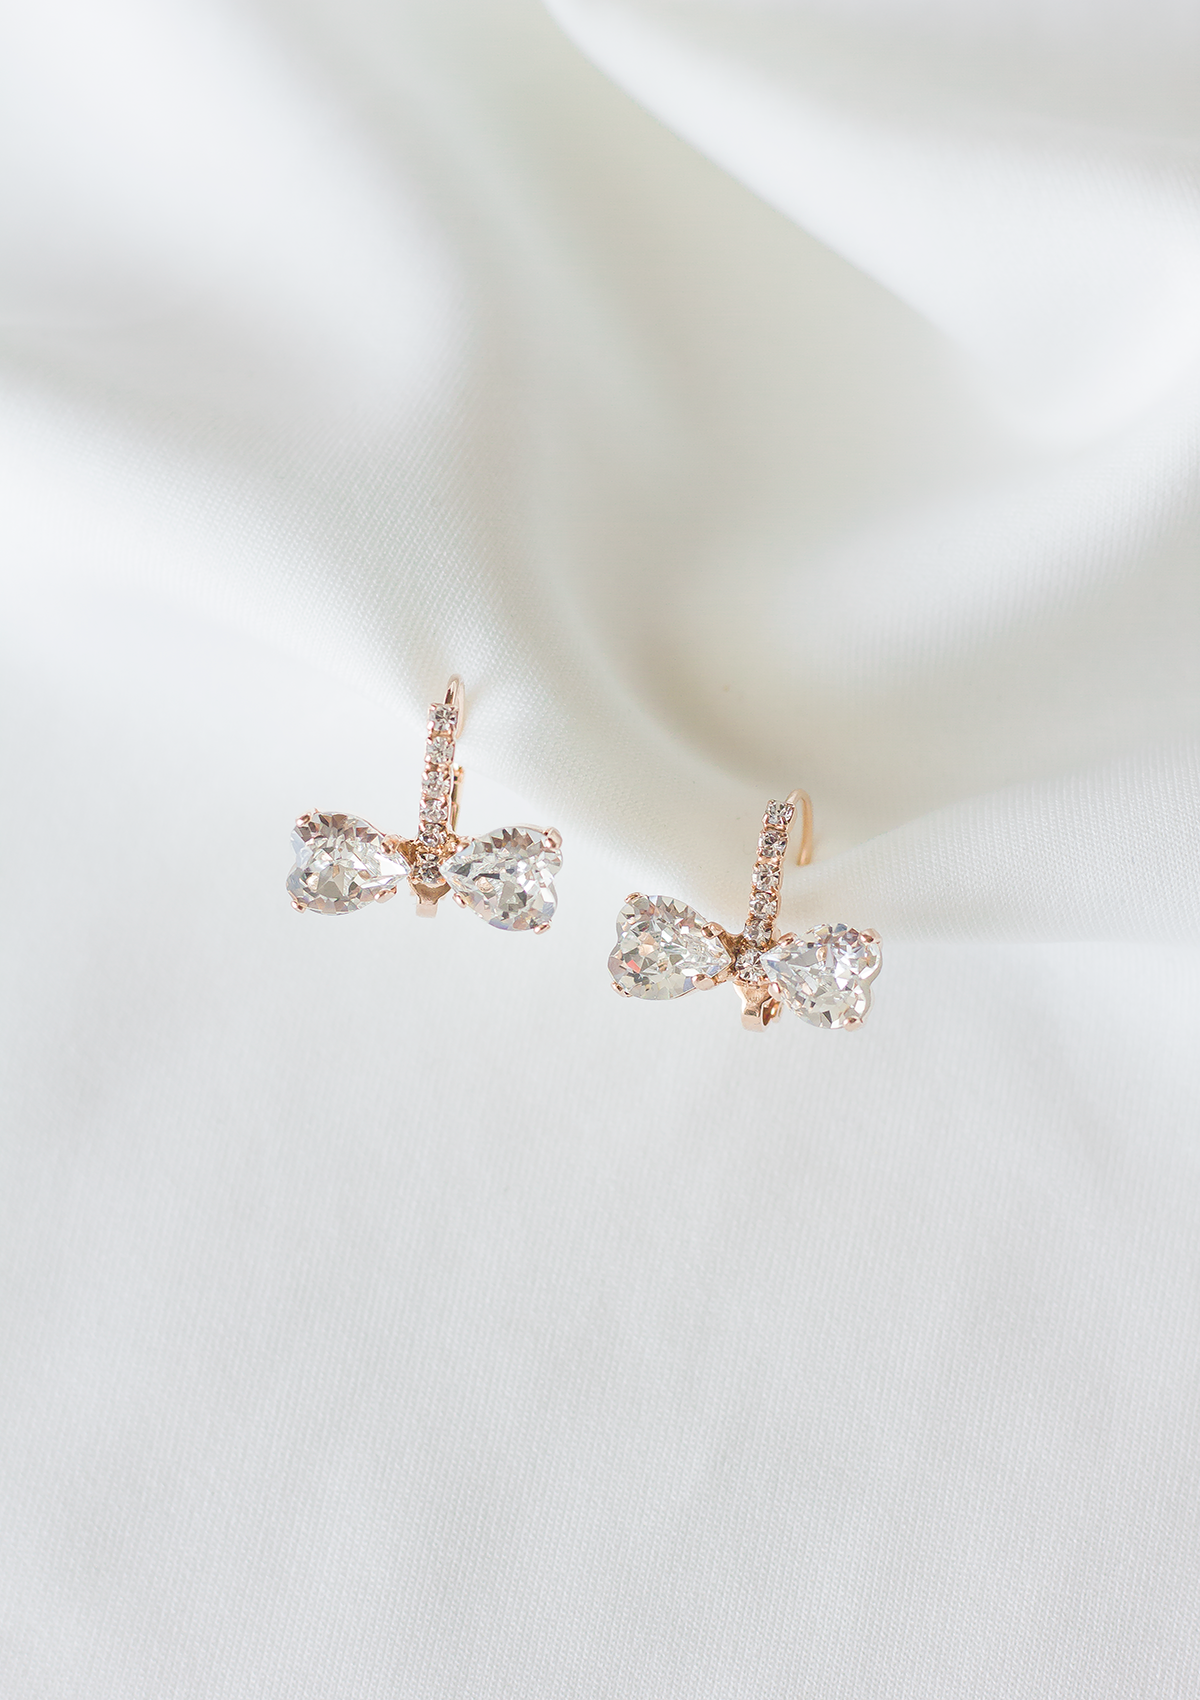 Marie Bow earrings, jewelry designed and made by Sarah Gauci in Malta. Rose Gold Plating. 